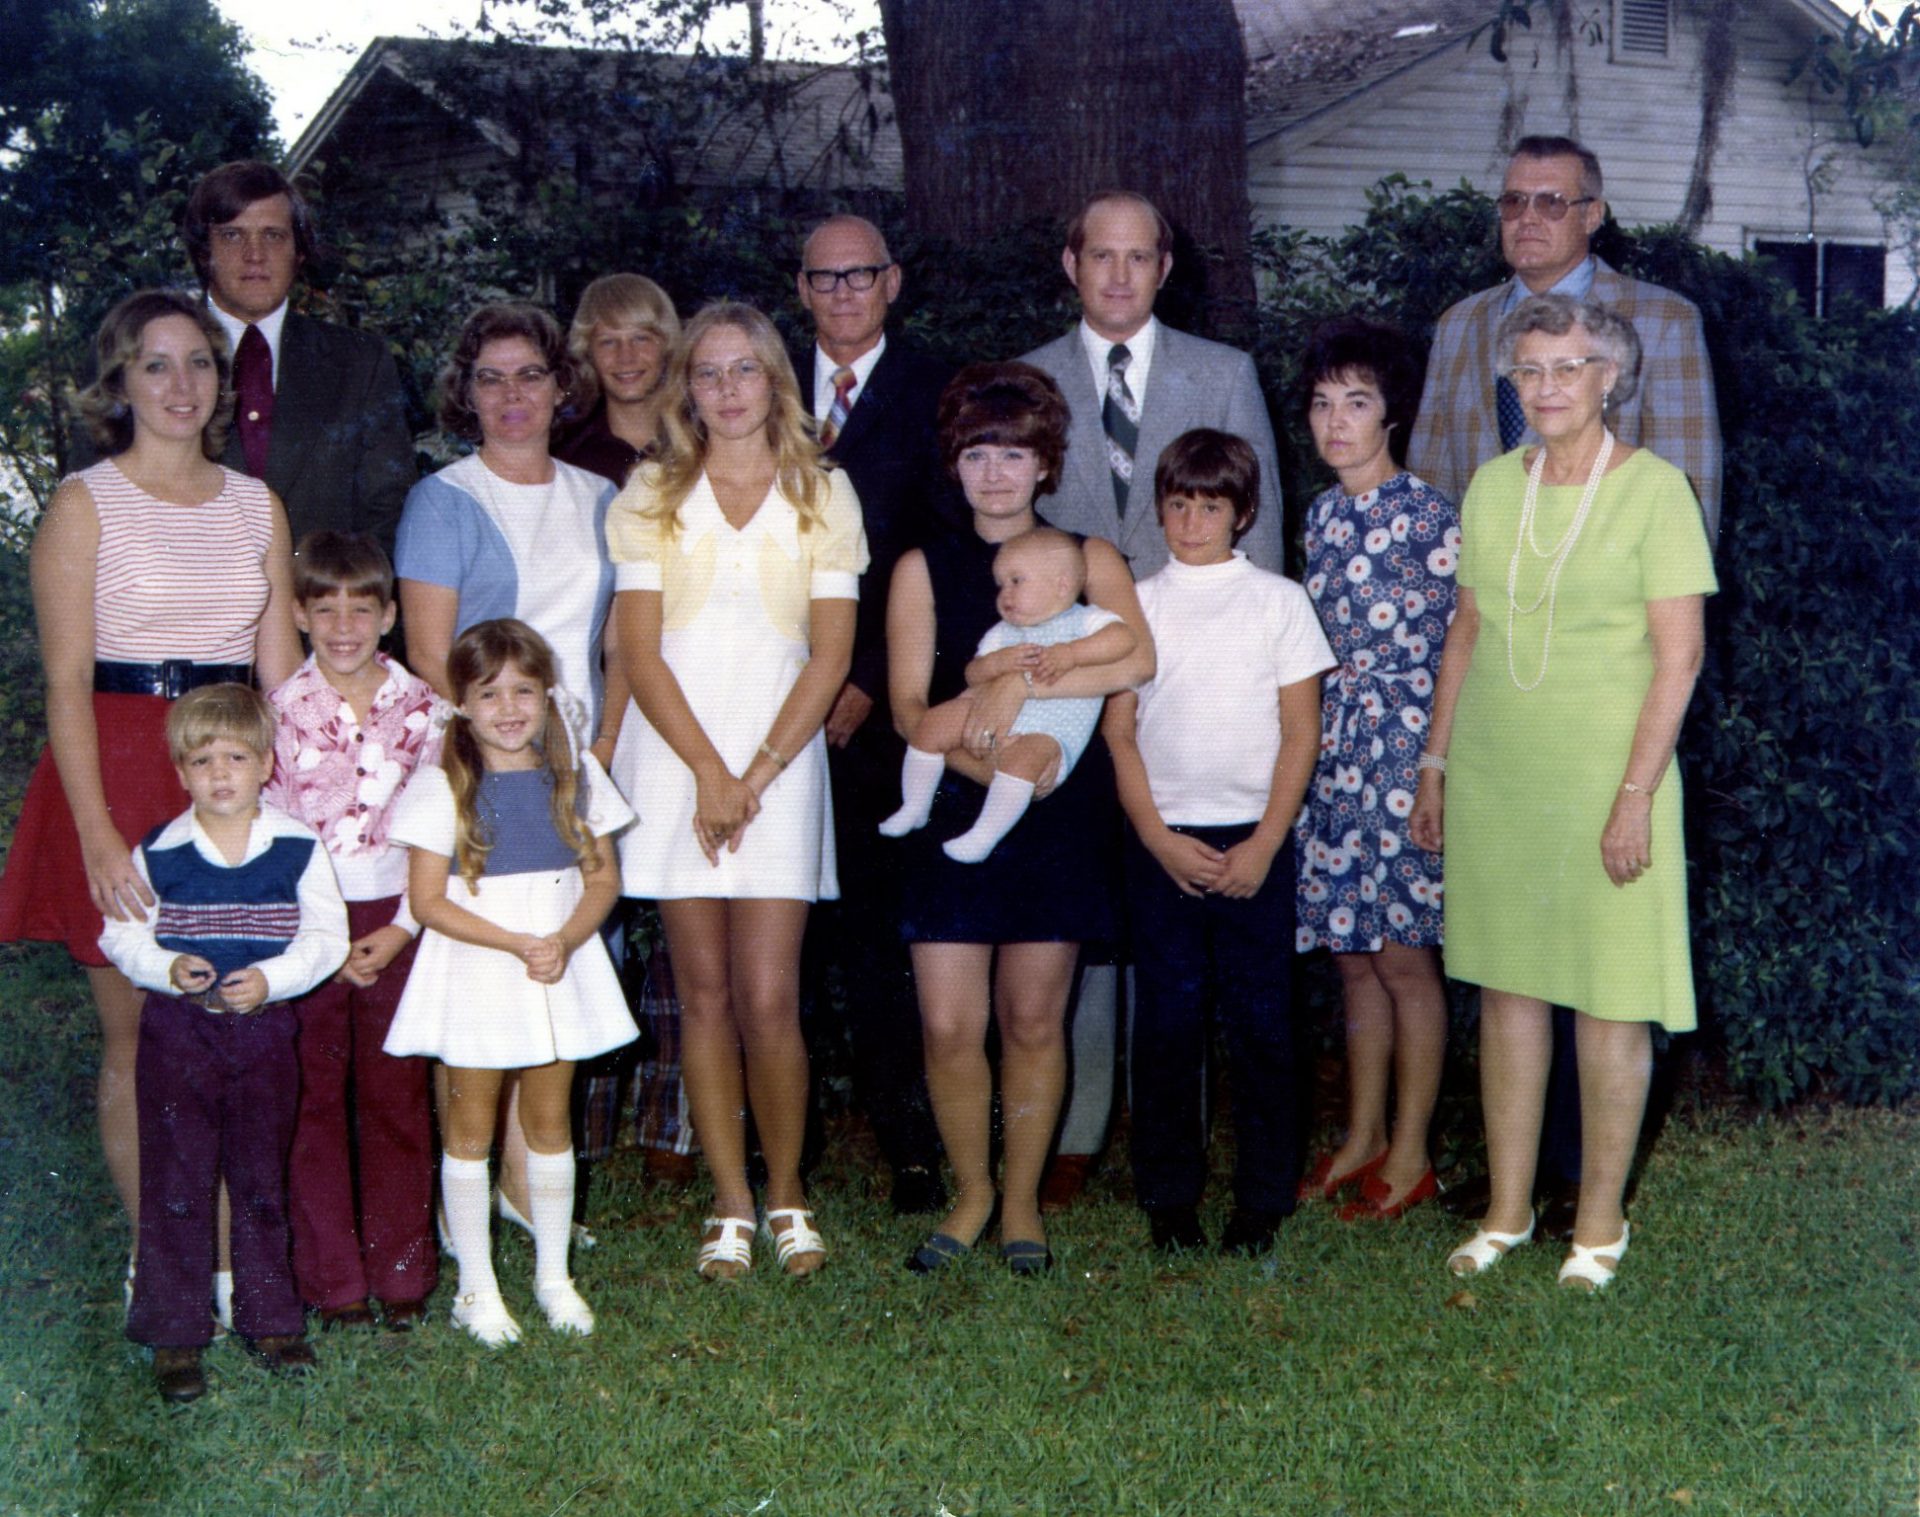 A gathering of the Richardson clan in 1975.   I think this was the last time the original group was all together.